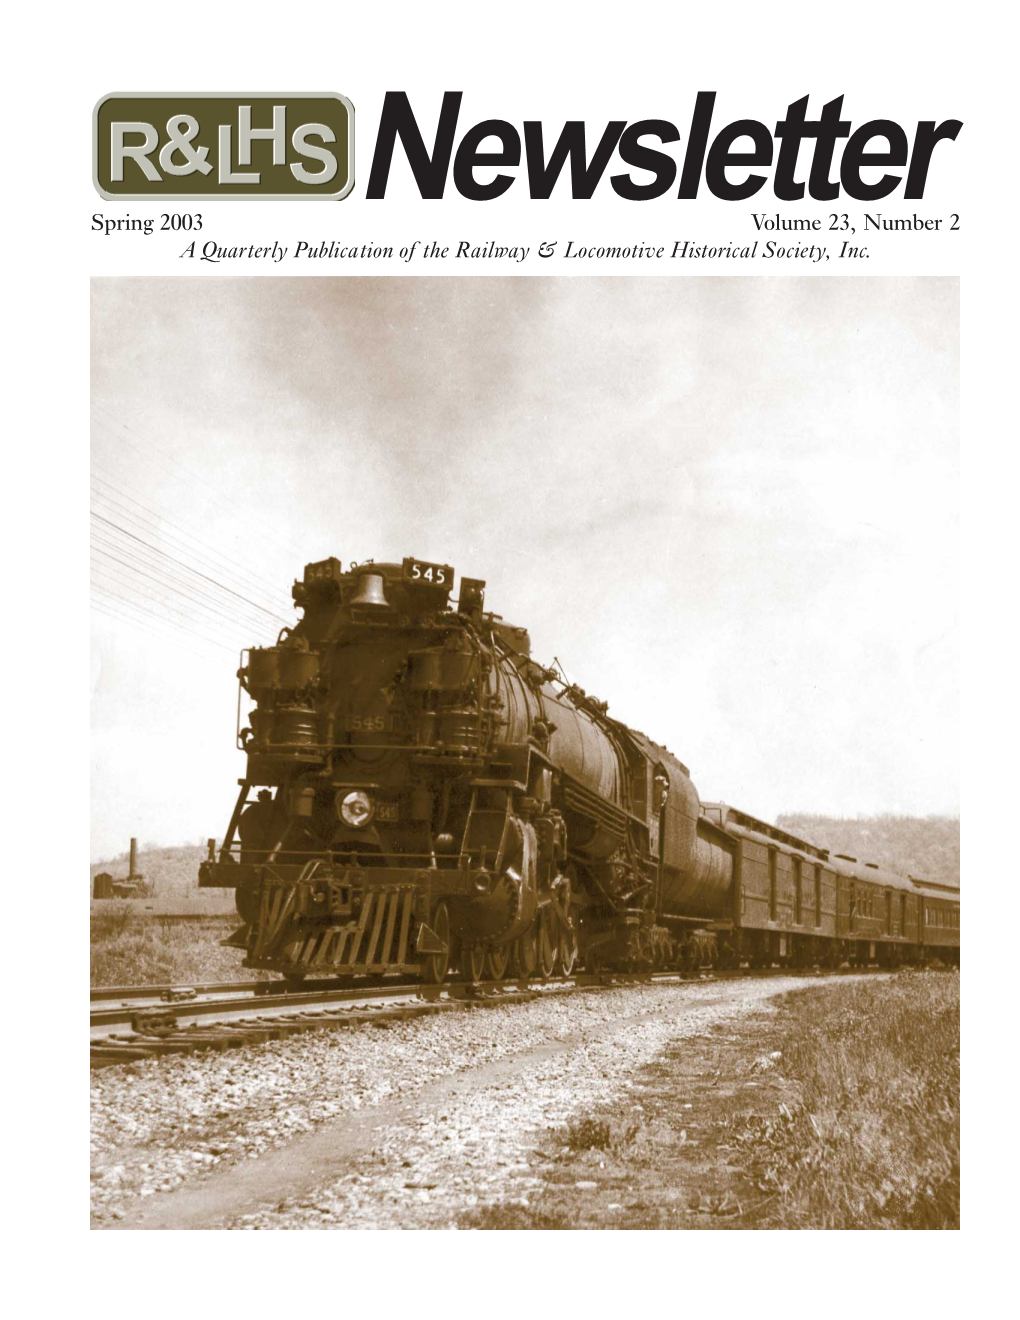 Newsletter 23-2 Page 2 the USRA HEAVY 4-8-2 and Its Illustrious Ascendants by Robert A